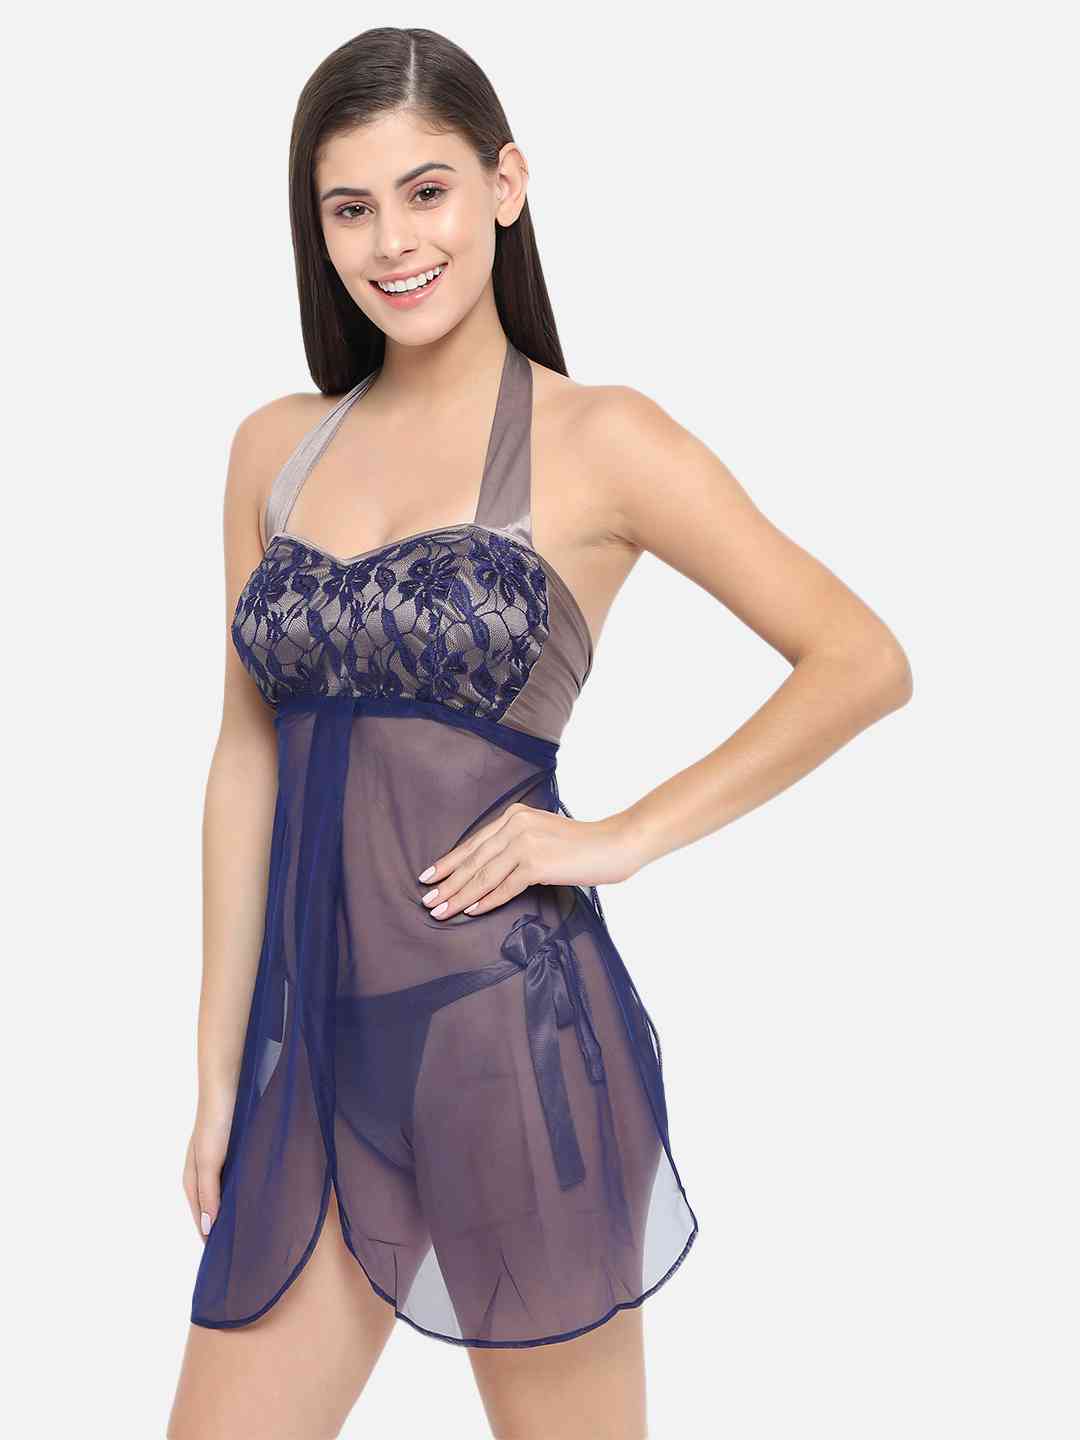 Buy The Purple Arrow Women's Silk Georgette Babydoll Night Dress Free Size  with Printed Bikini Lingerie Set - Pack of 2, Black, Free Size at Amazon.in